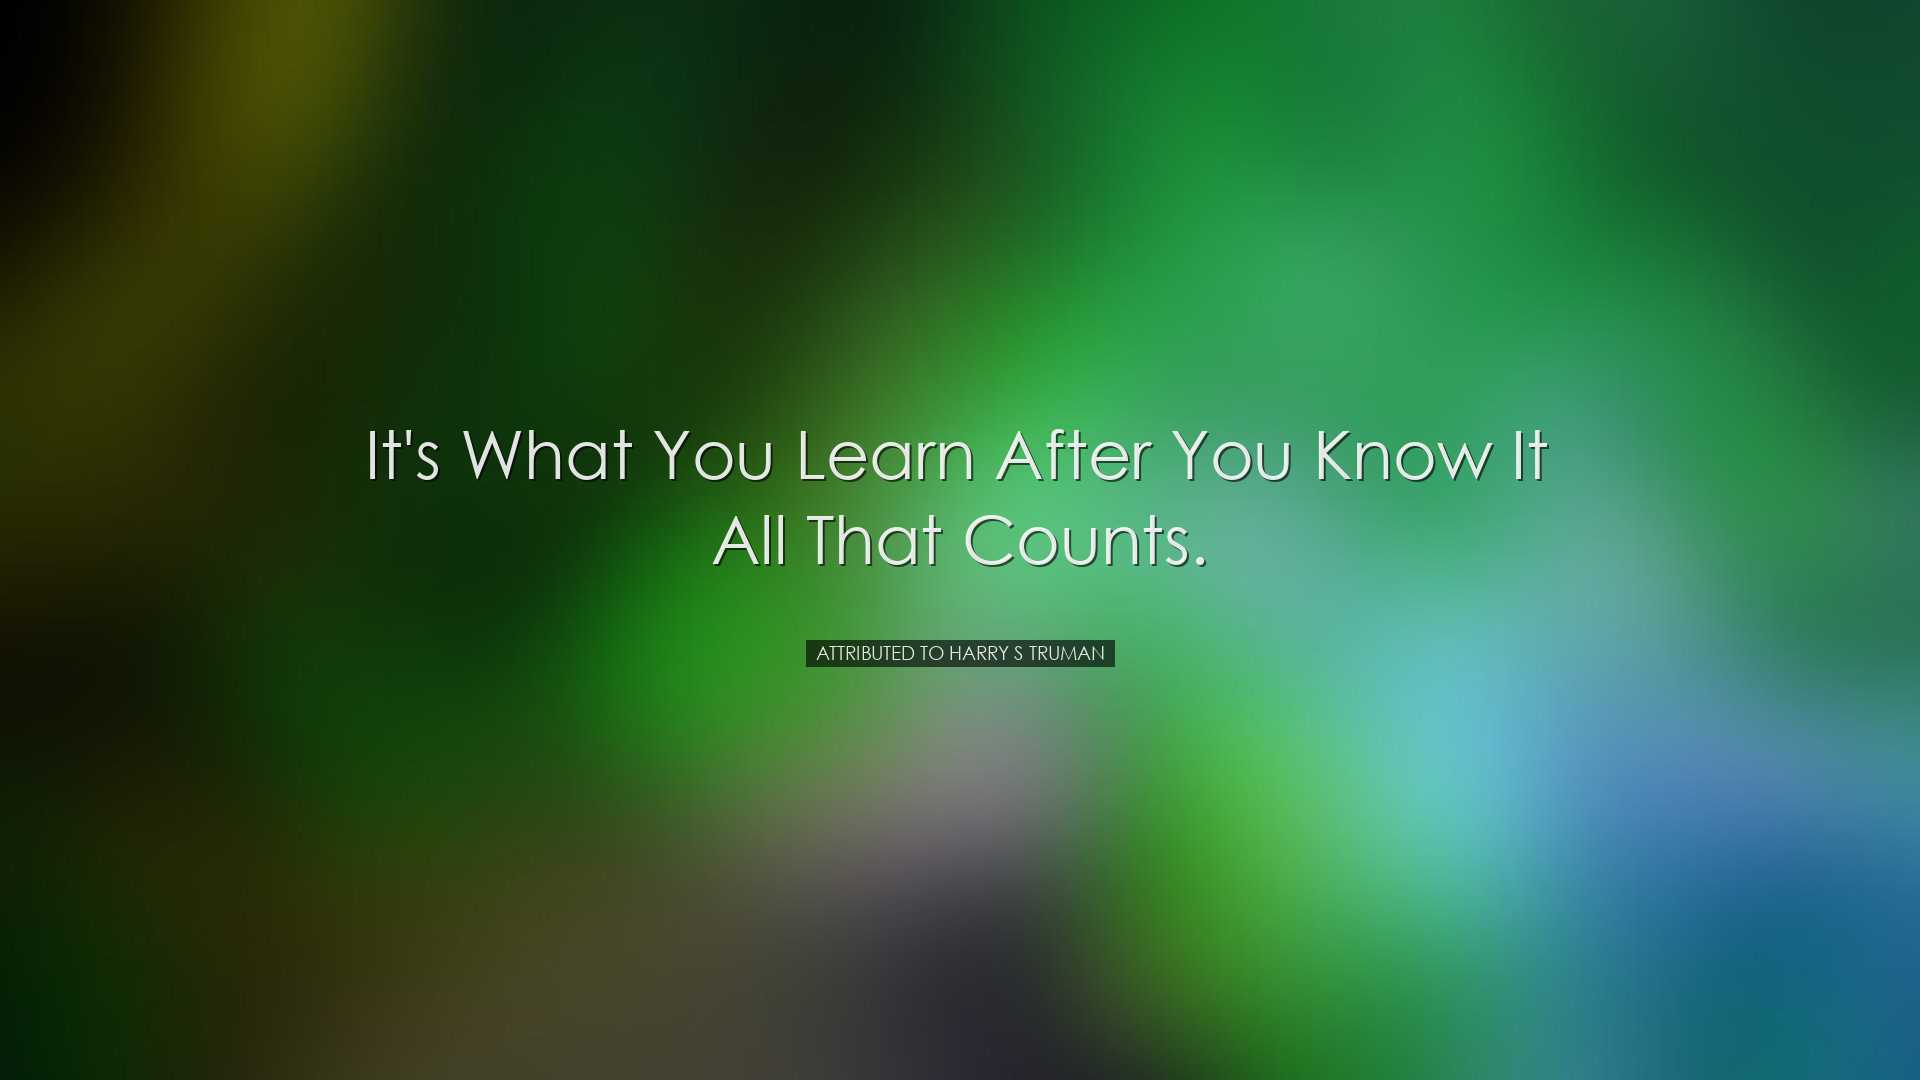 It's what you learn after you know it all that counts. - Attribute